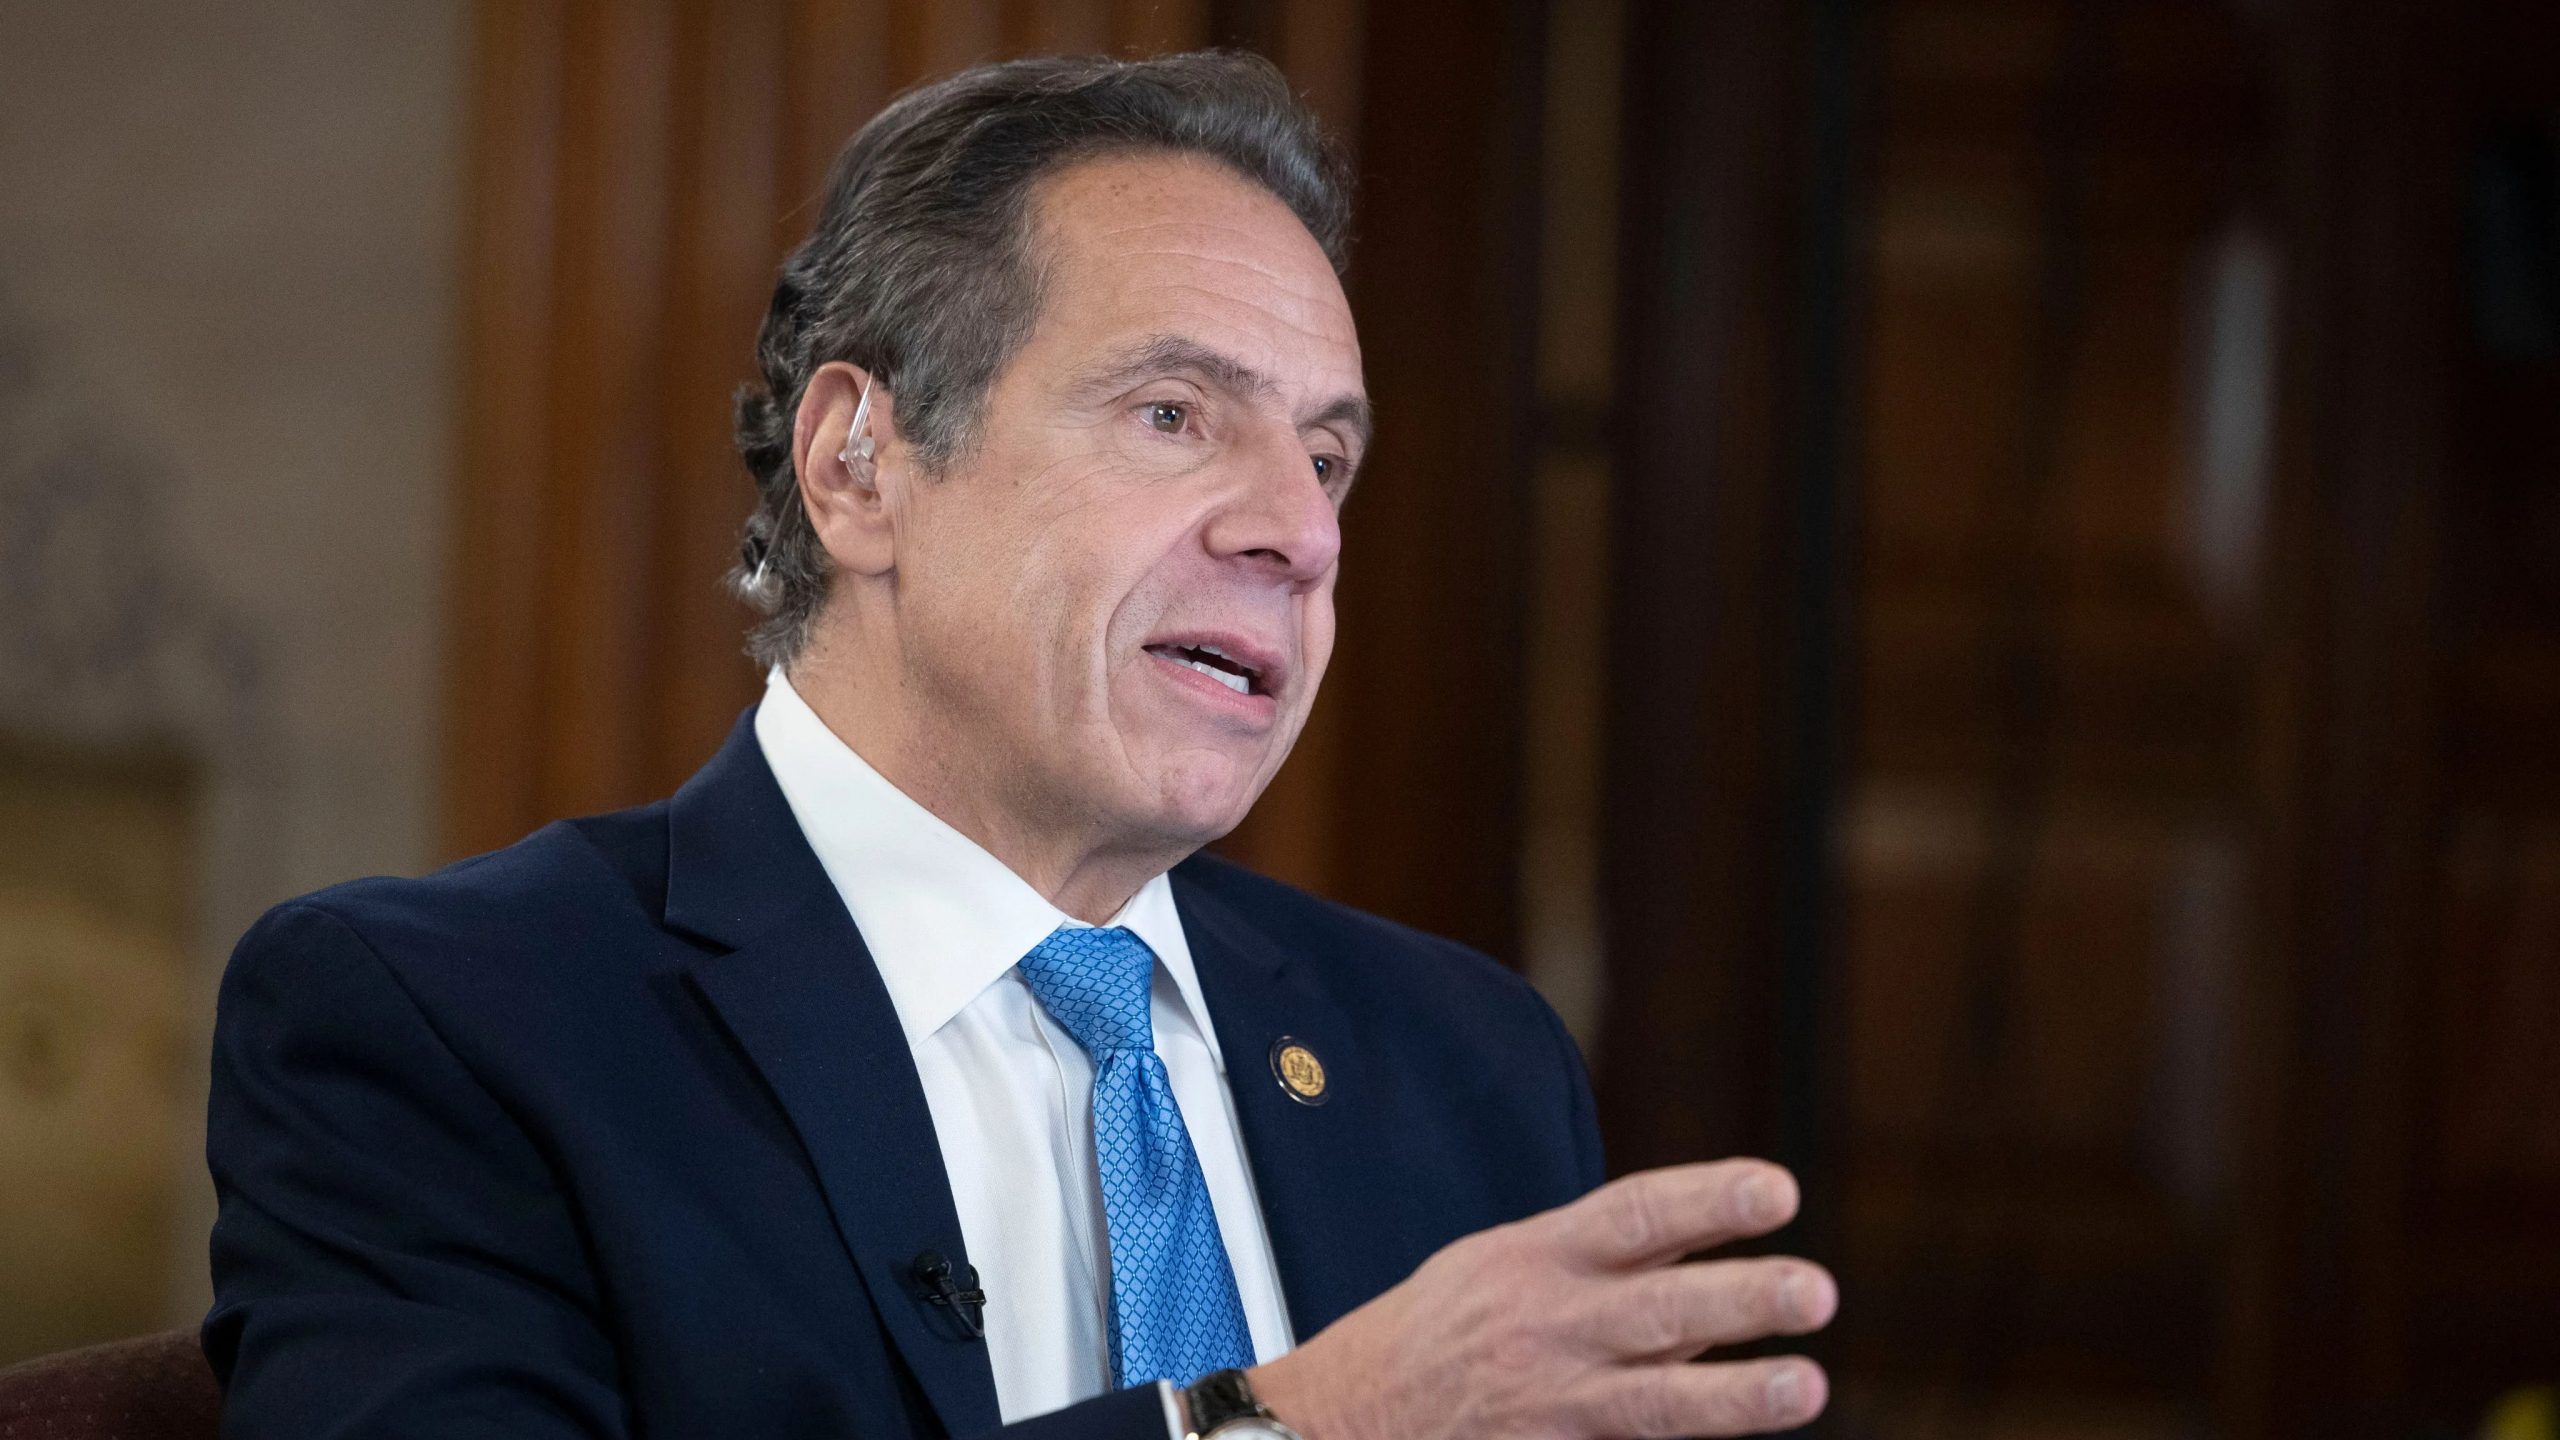 Andrew Cuomo denies claims of sexual misconduct with a woman at governor’s residence